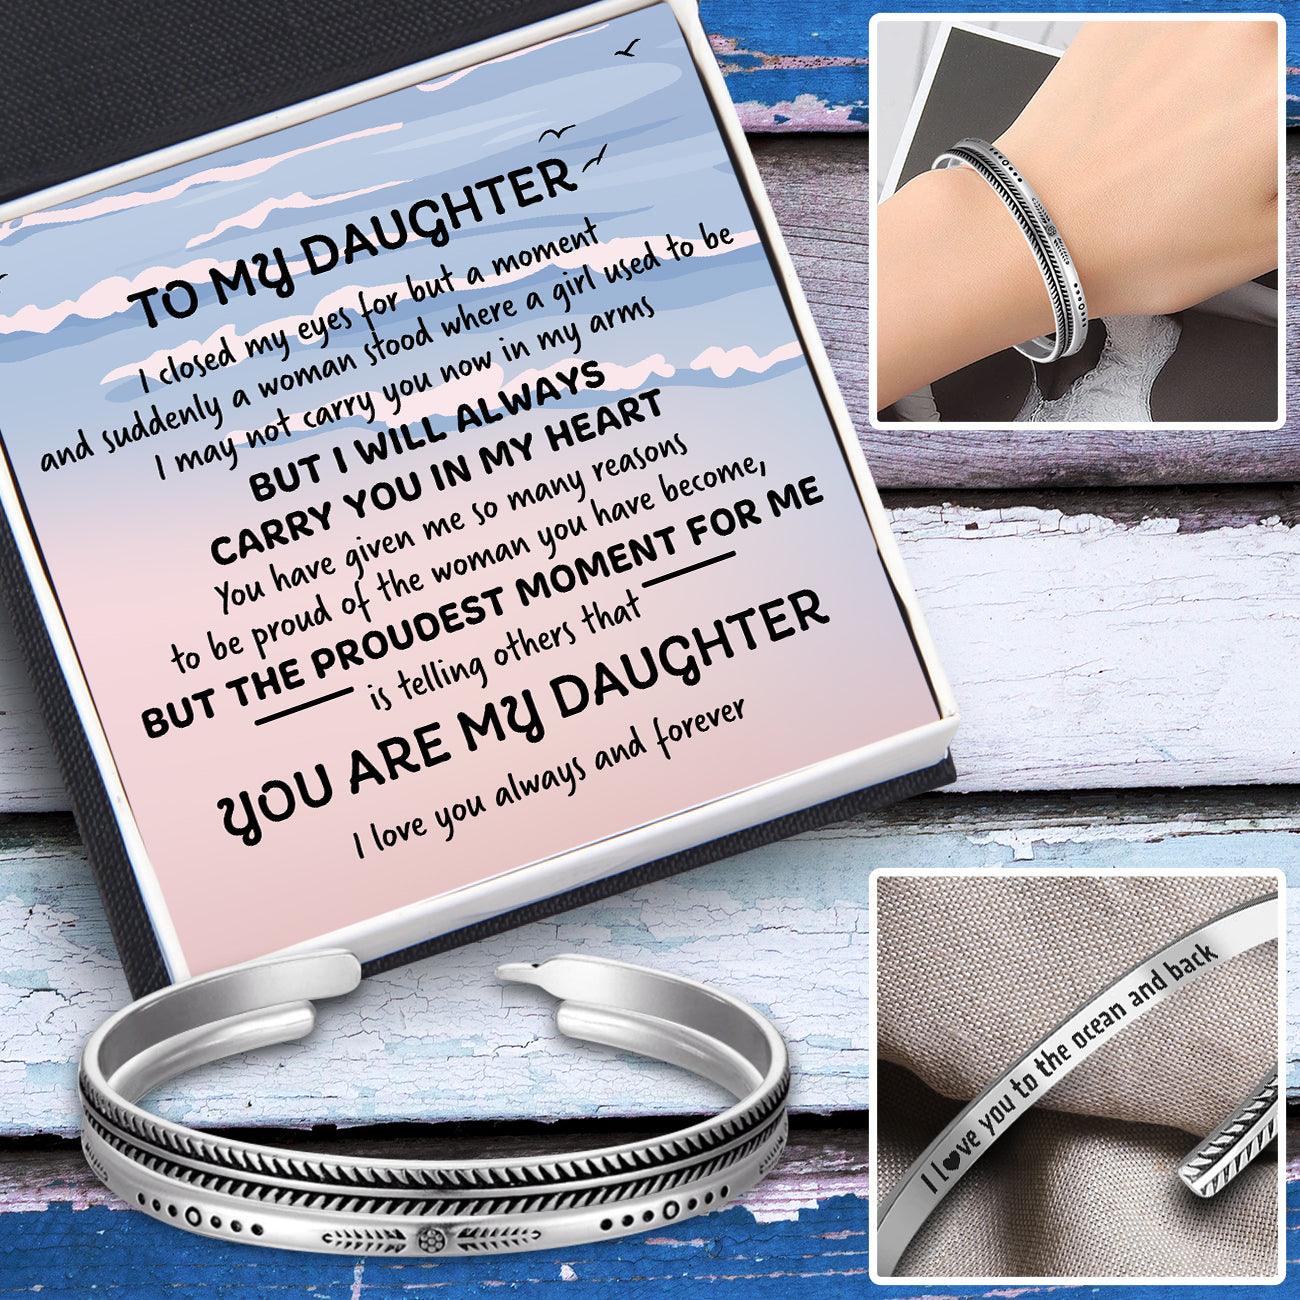 Fish Bone Bangles Set - Fishing - To My Daughter - I Will Always Carry You In My Heart - Augnne17001 - Gifts Holder